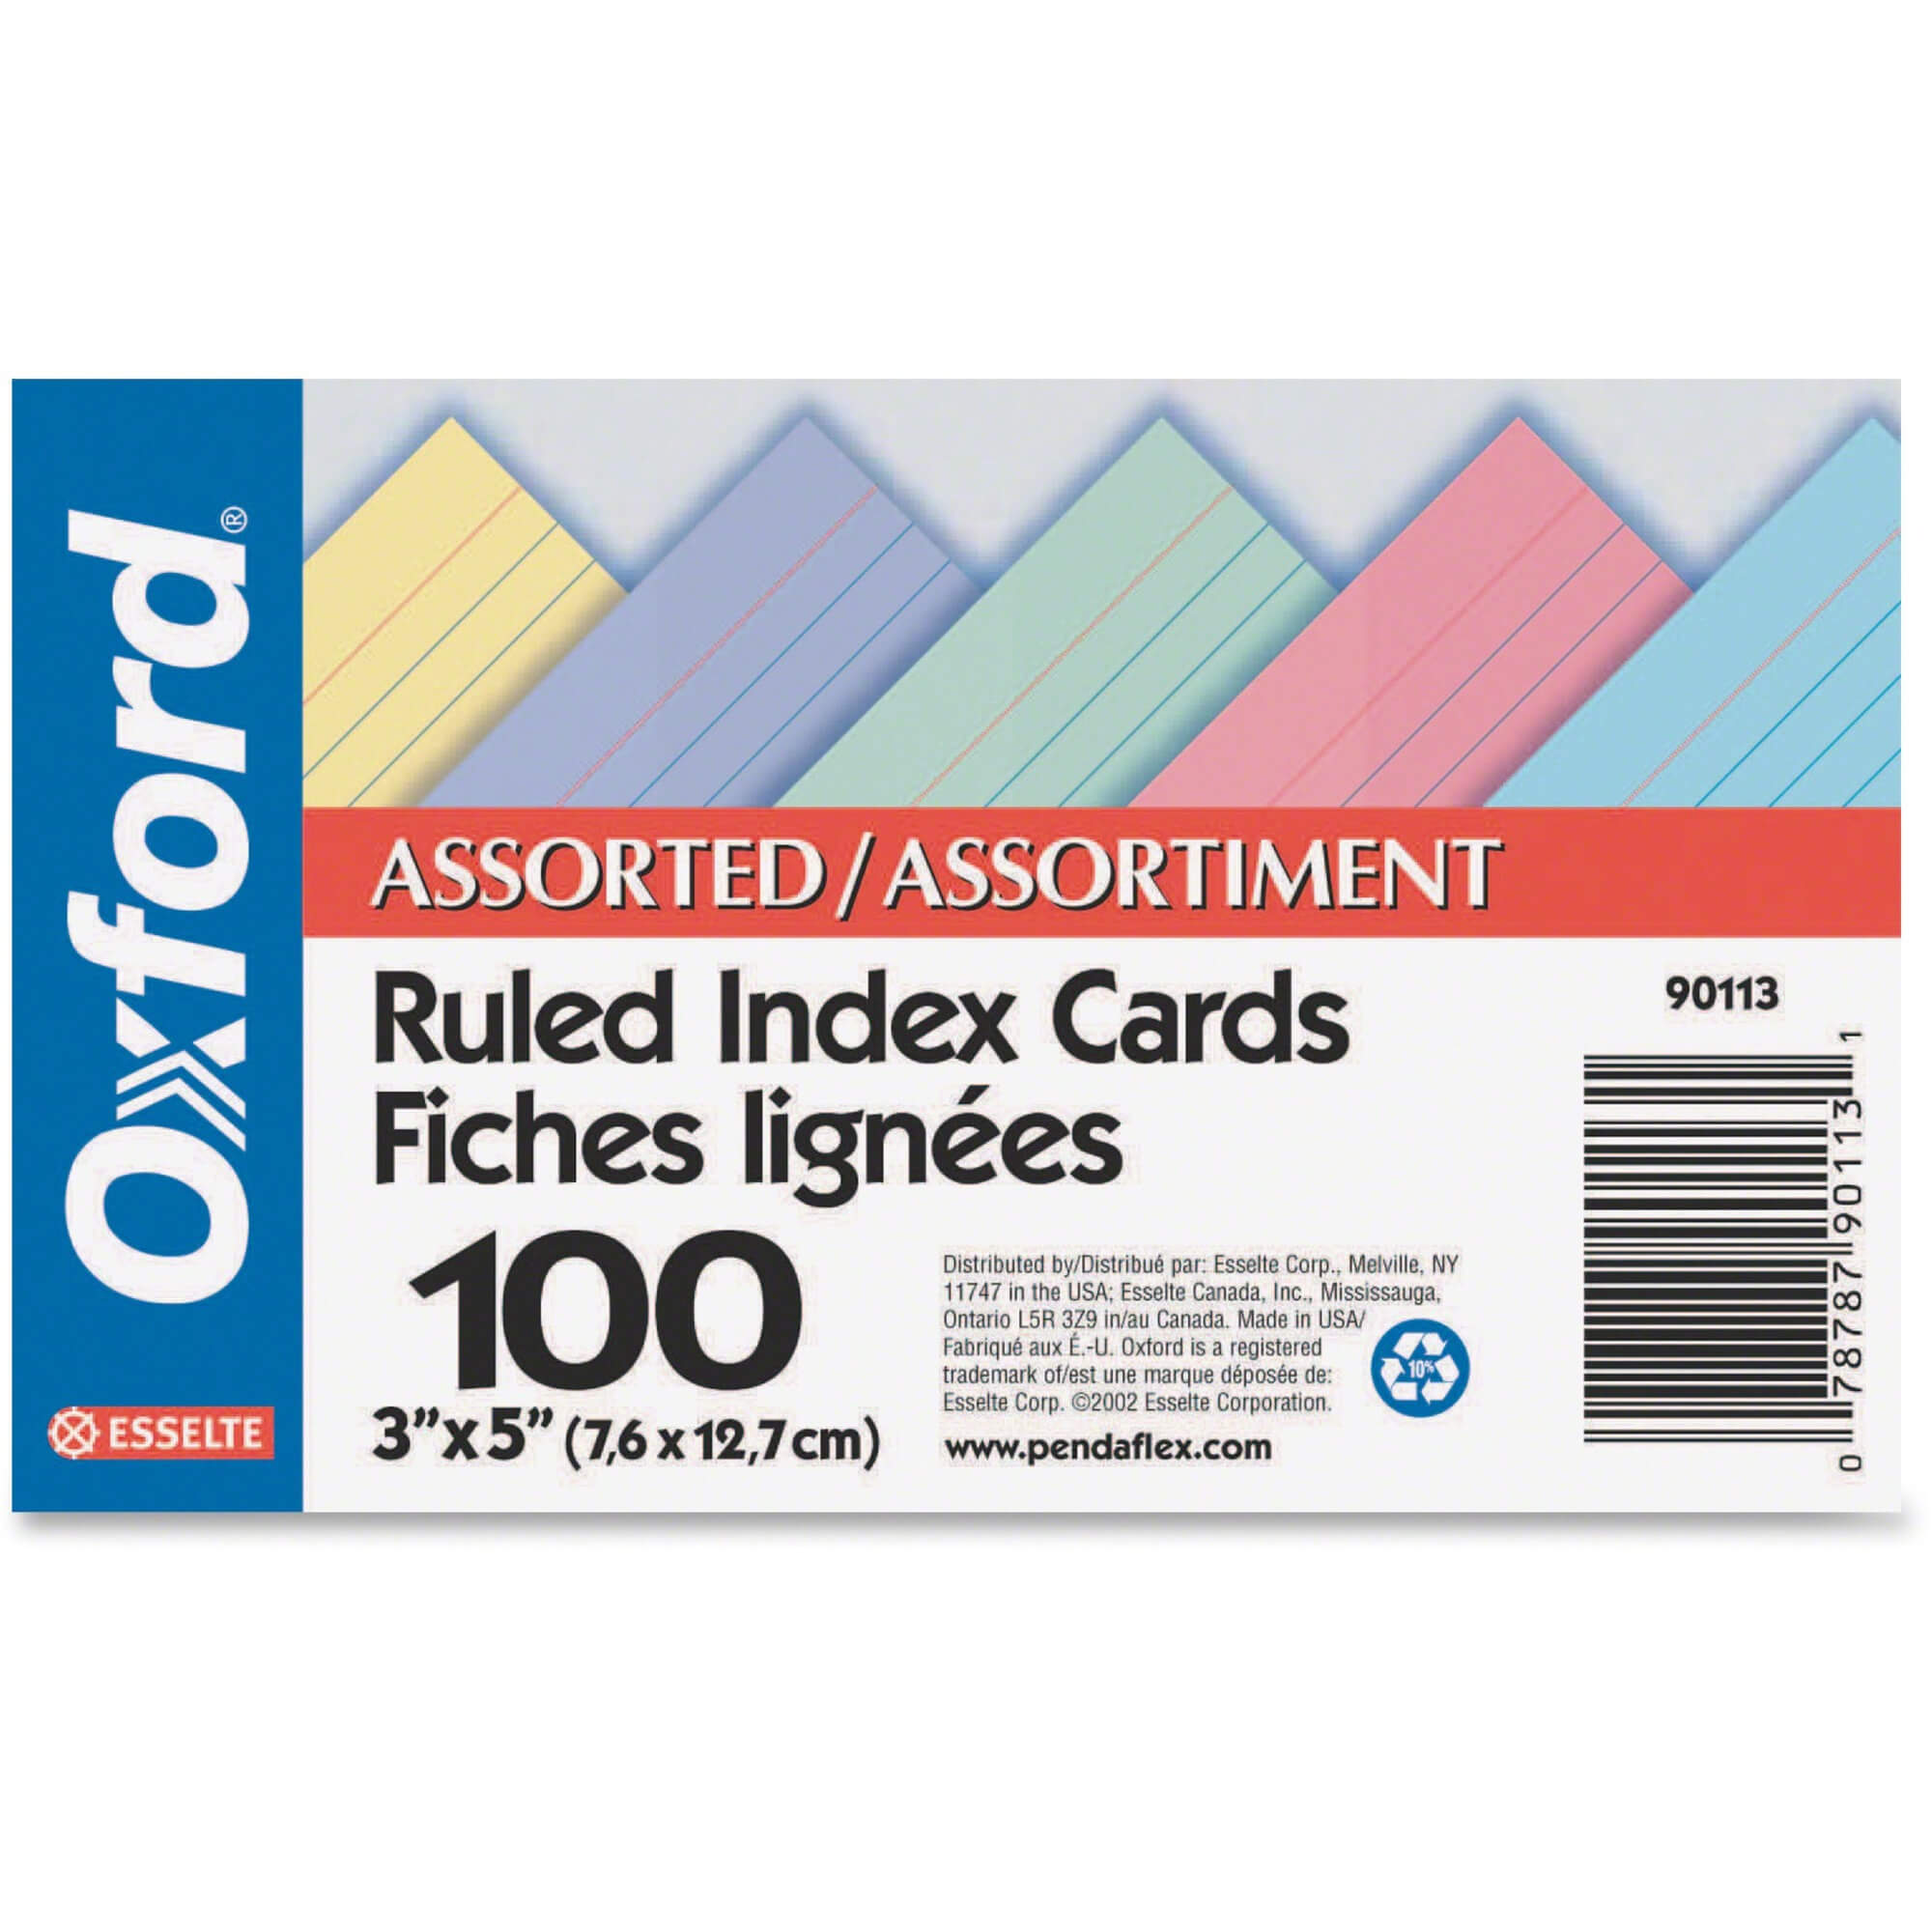 Ocean Stationery And Office Supplies :: Office Supplies With 3 By 5 Index Card Template